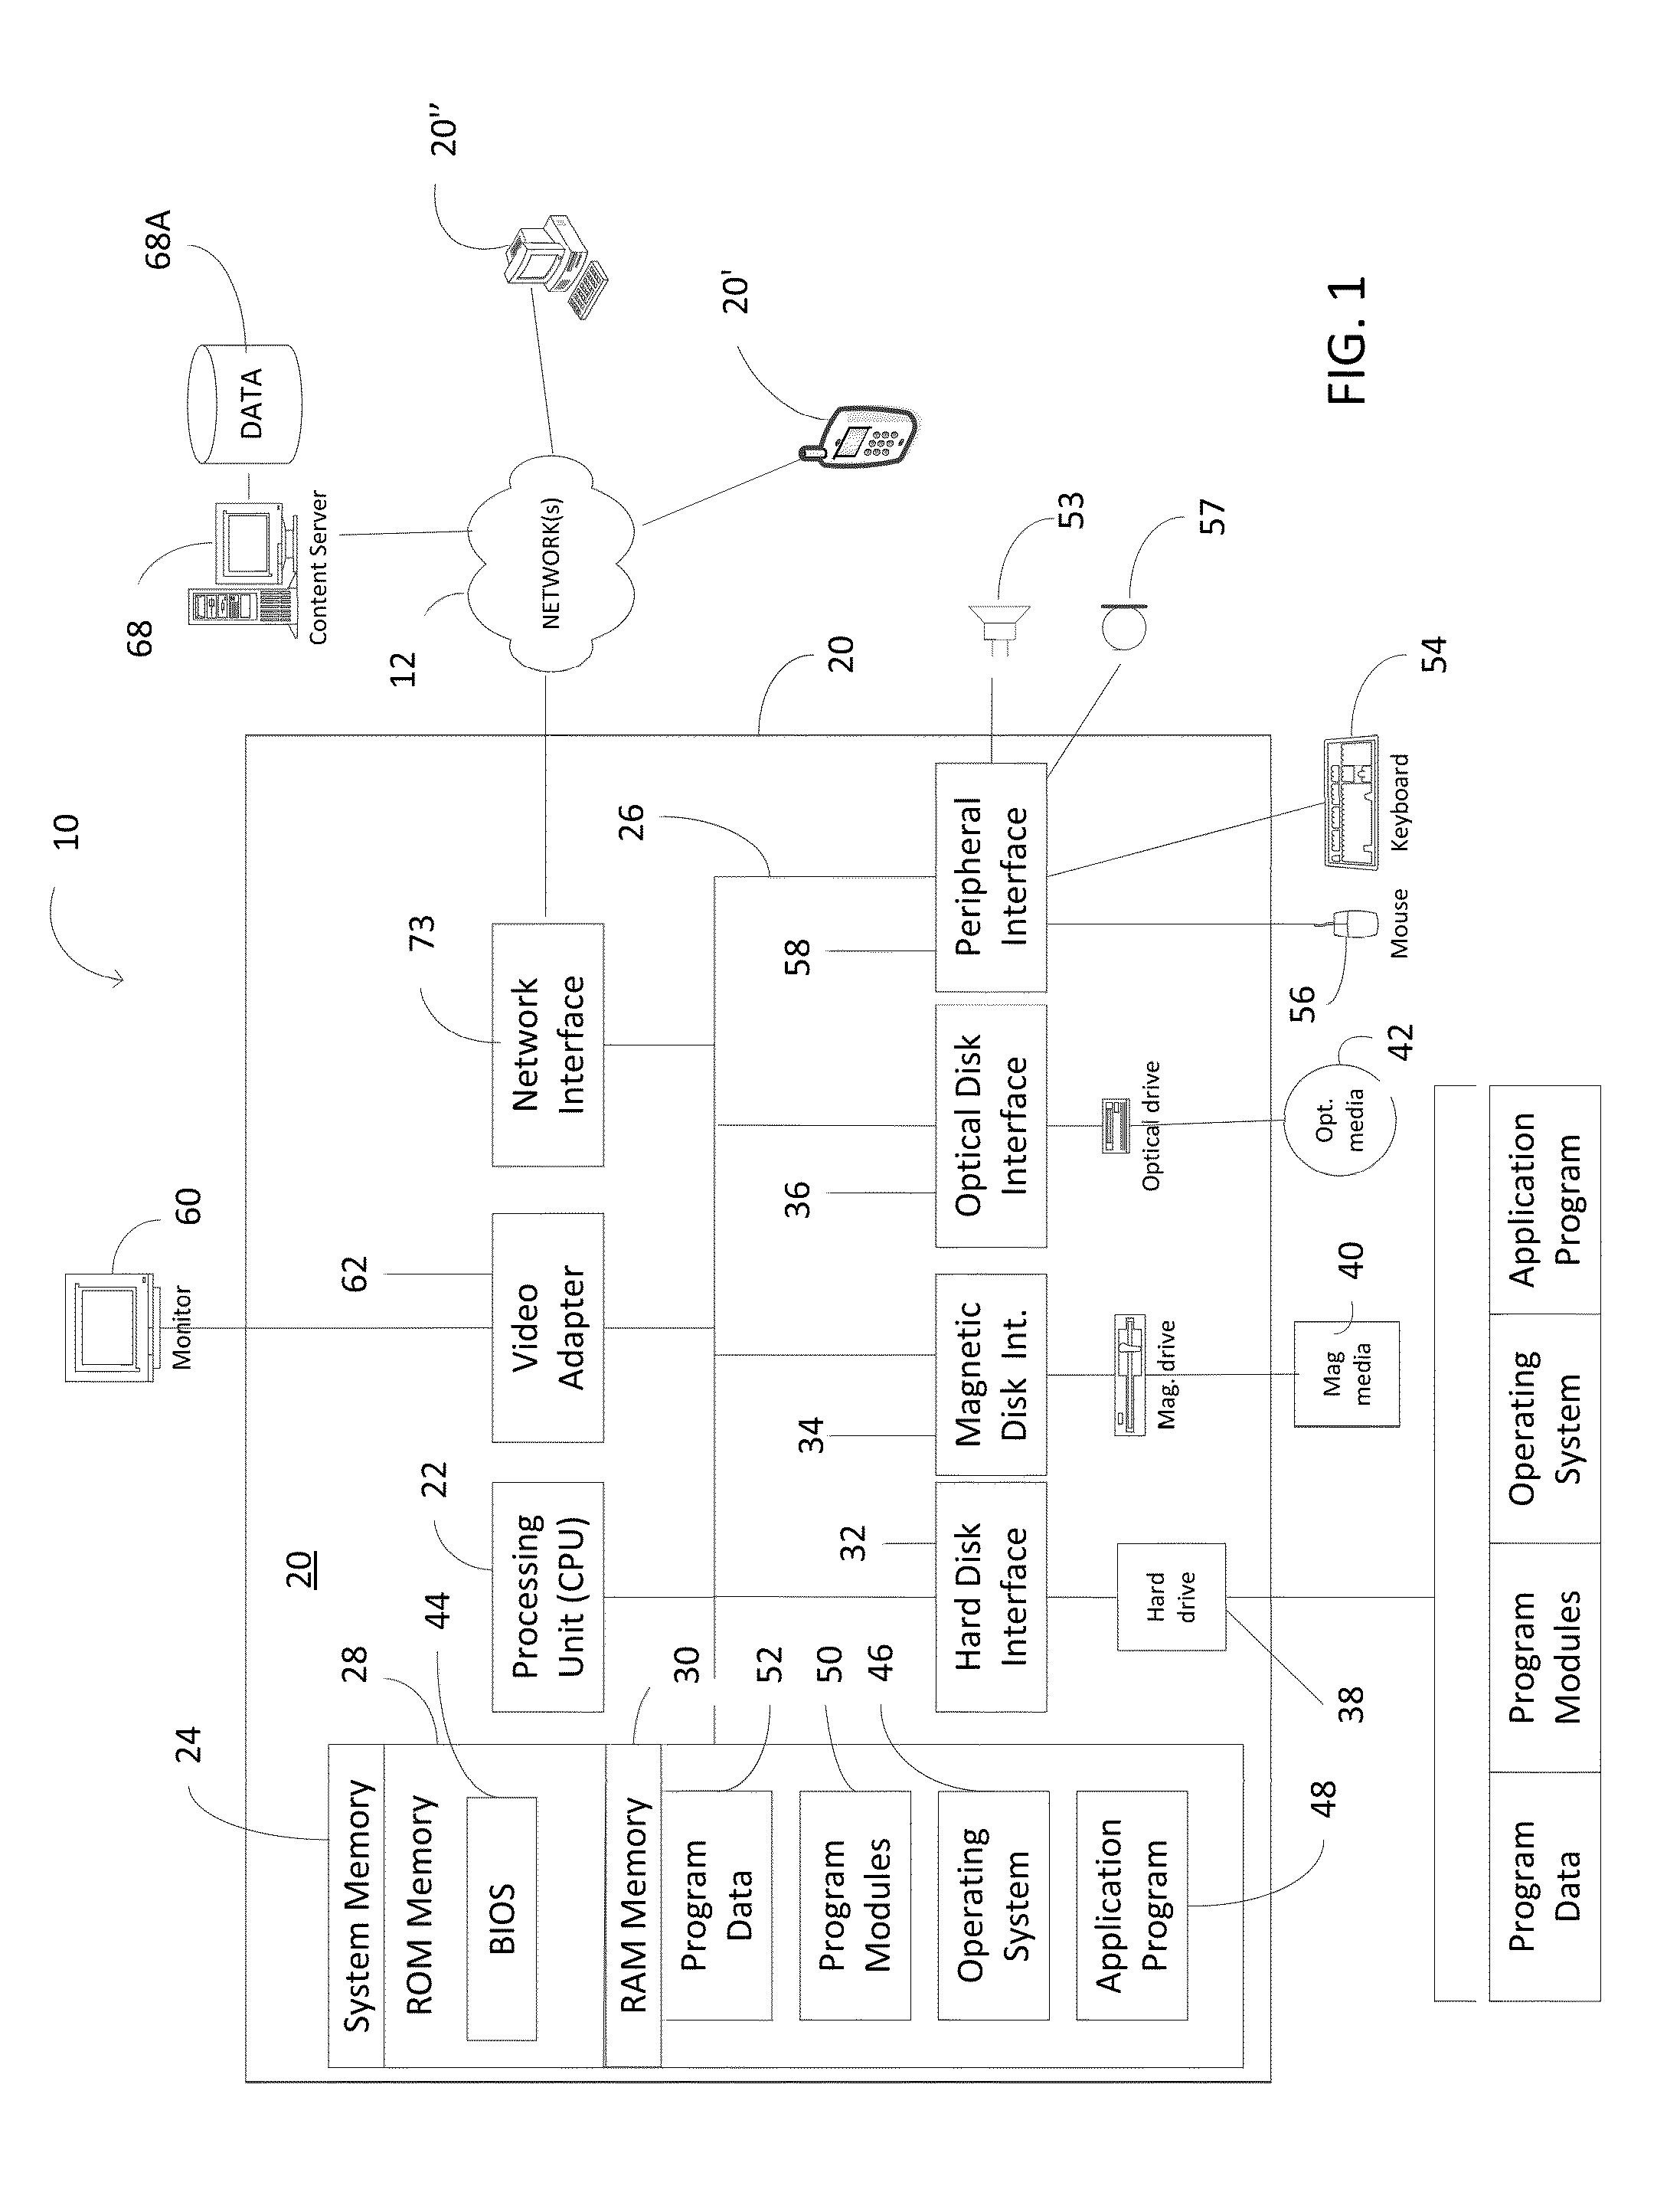 Systems and methods for using isolated vowel sounds for assessment of mild traumatic brain injury